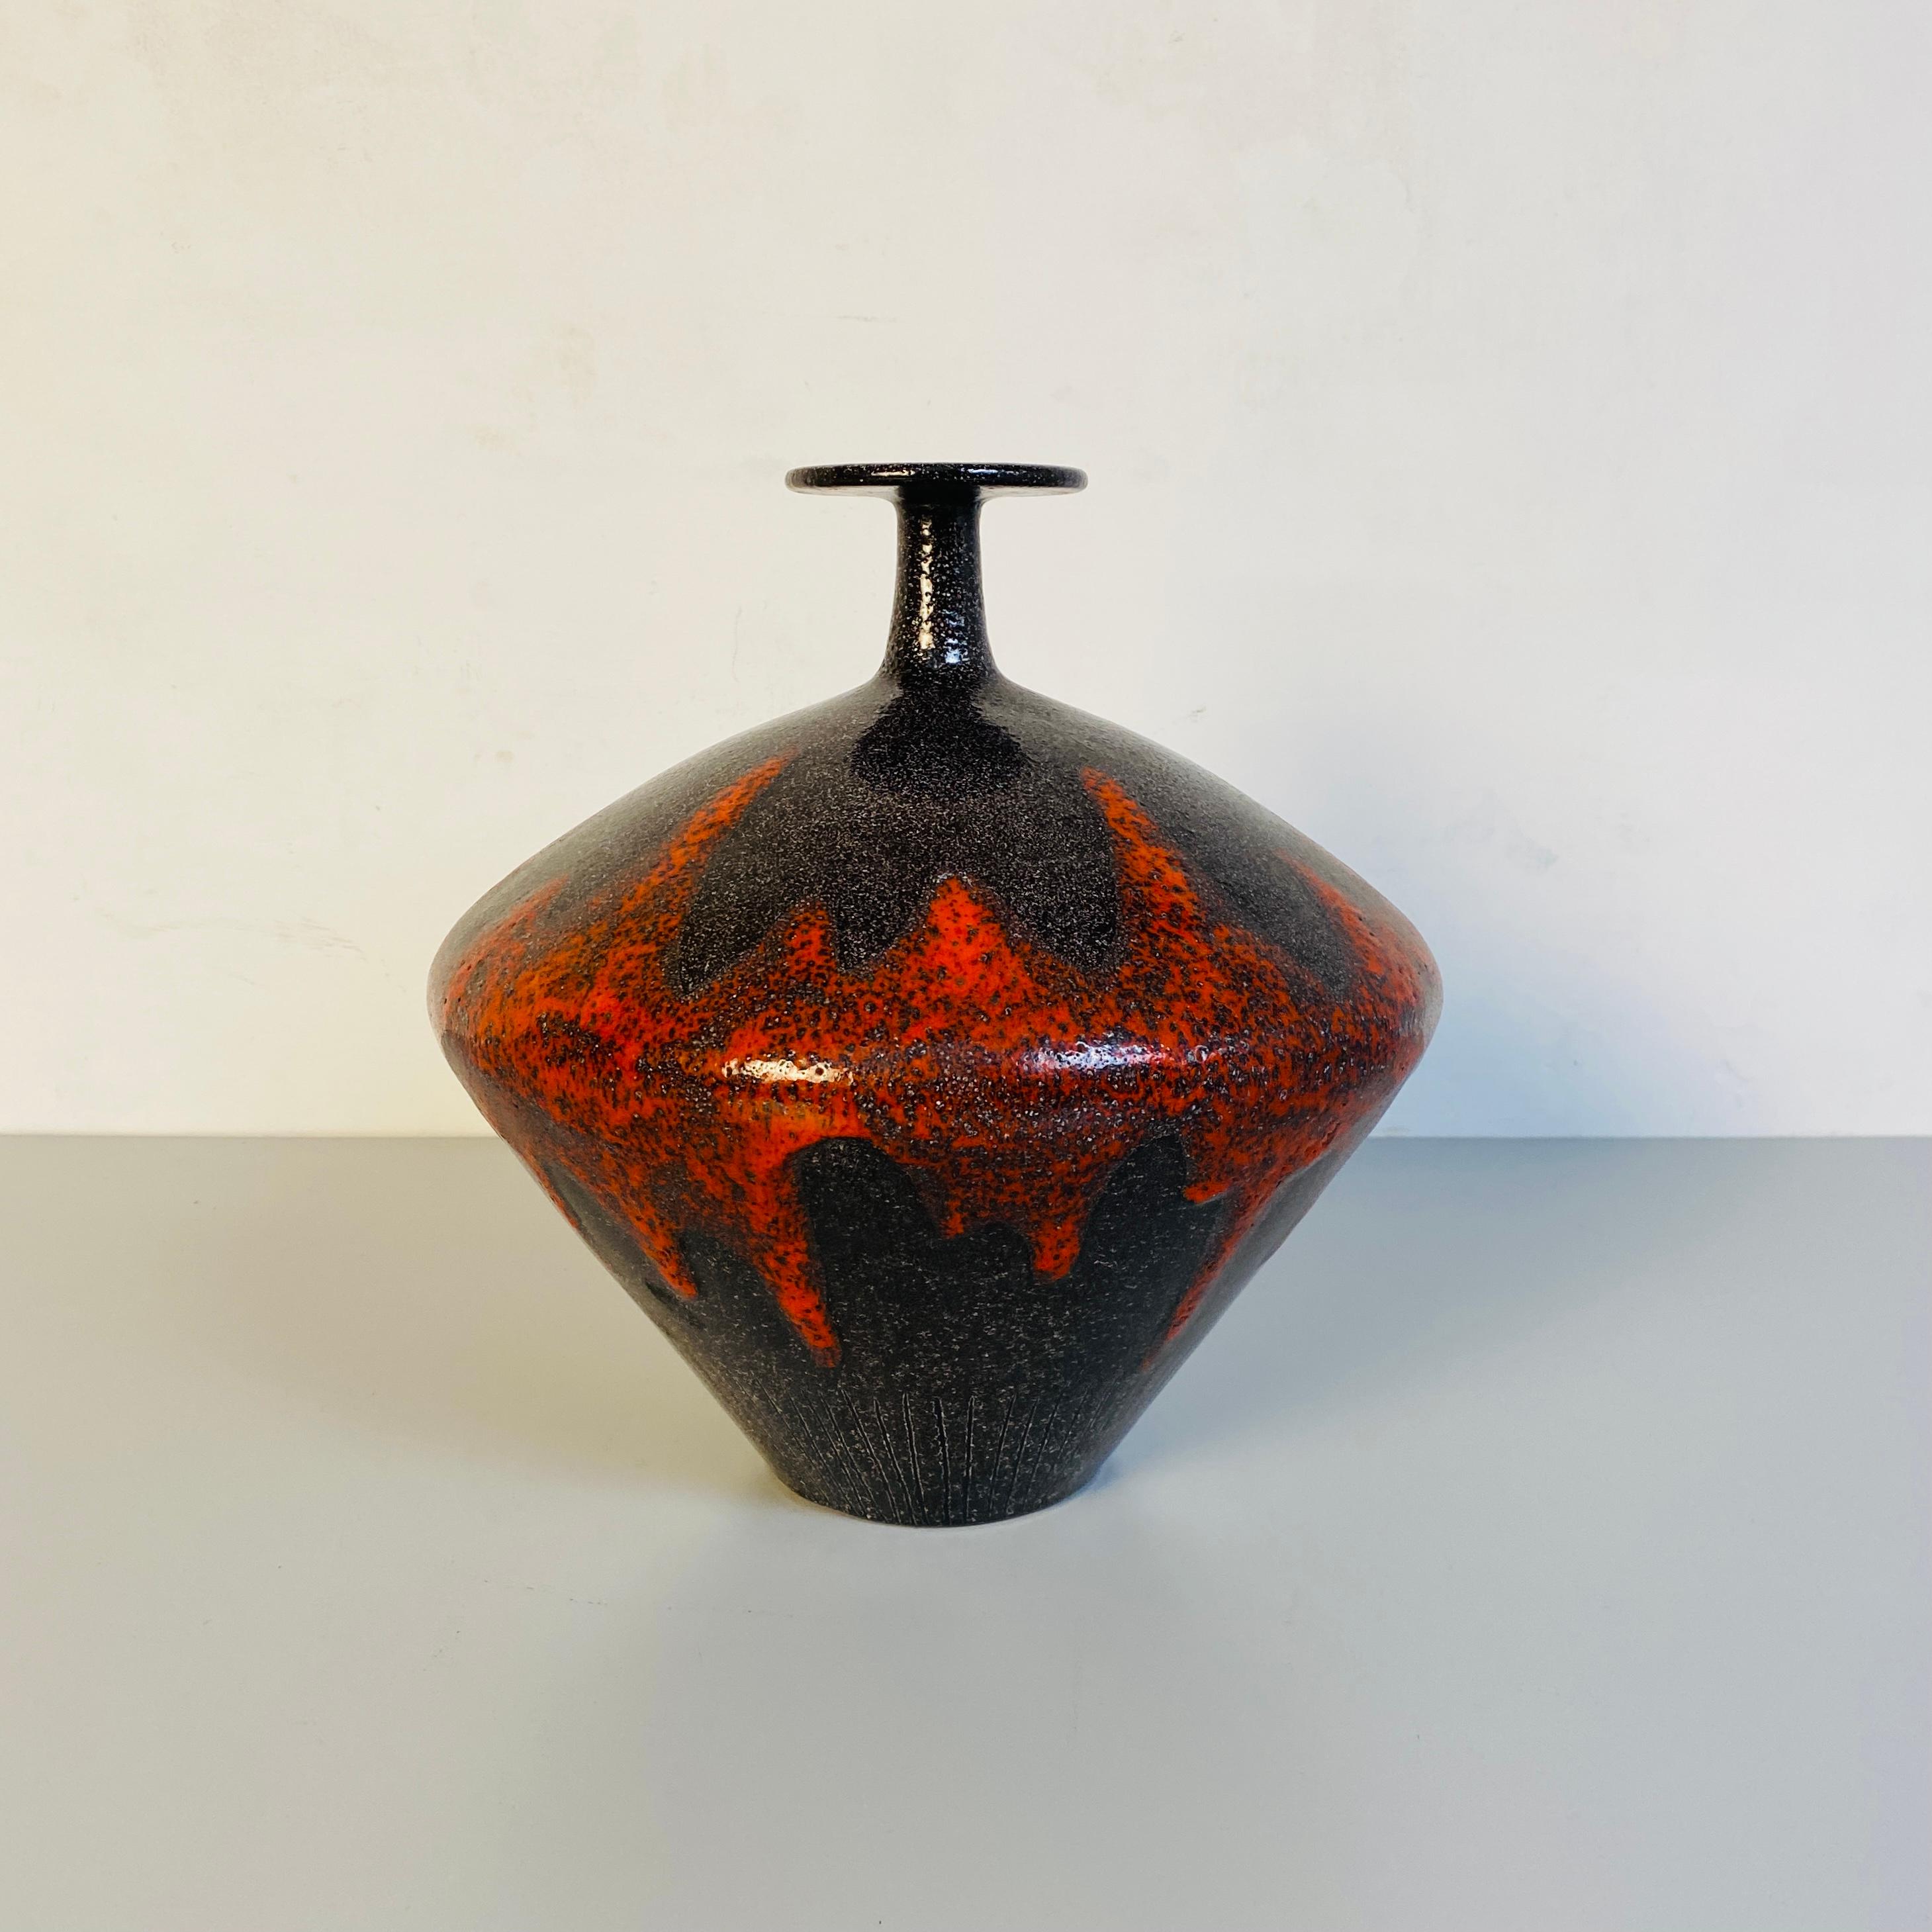 Italian Mid-Century Modern ceramic vase n 2\707 by San Polo Venezia, 1960s
Rhomboid-shaped ceramic vase in shades of dark brown with abstract red decorations. Numbered 2/707 and branded 